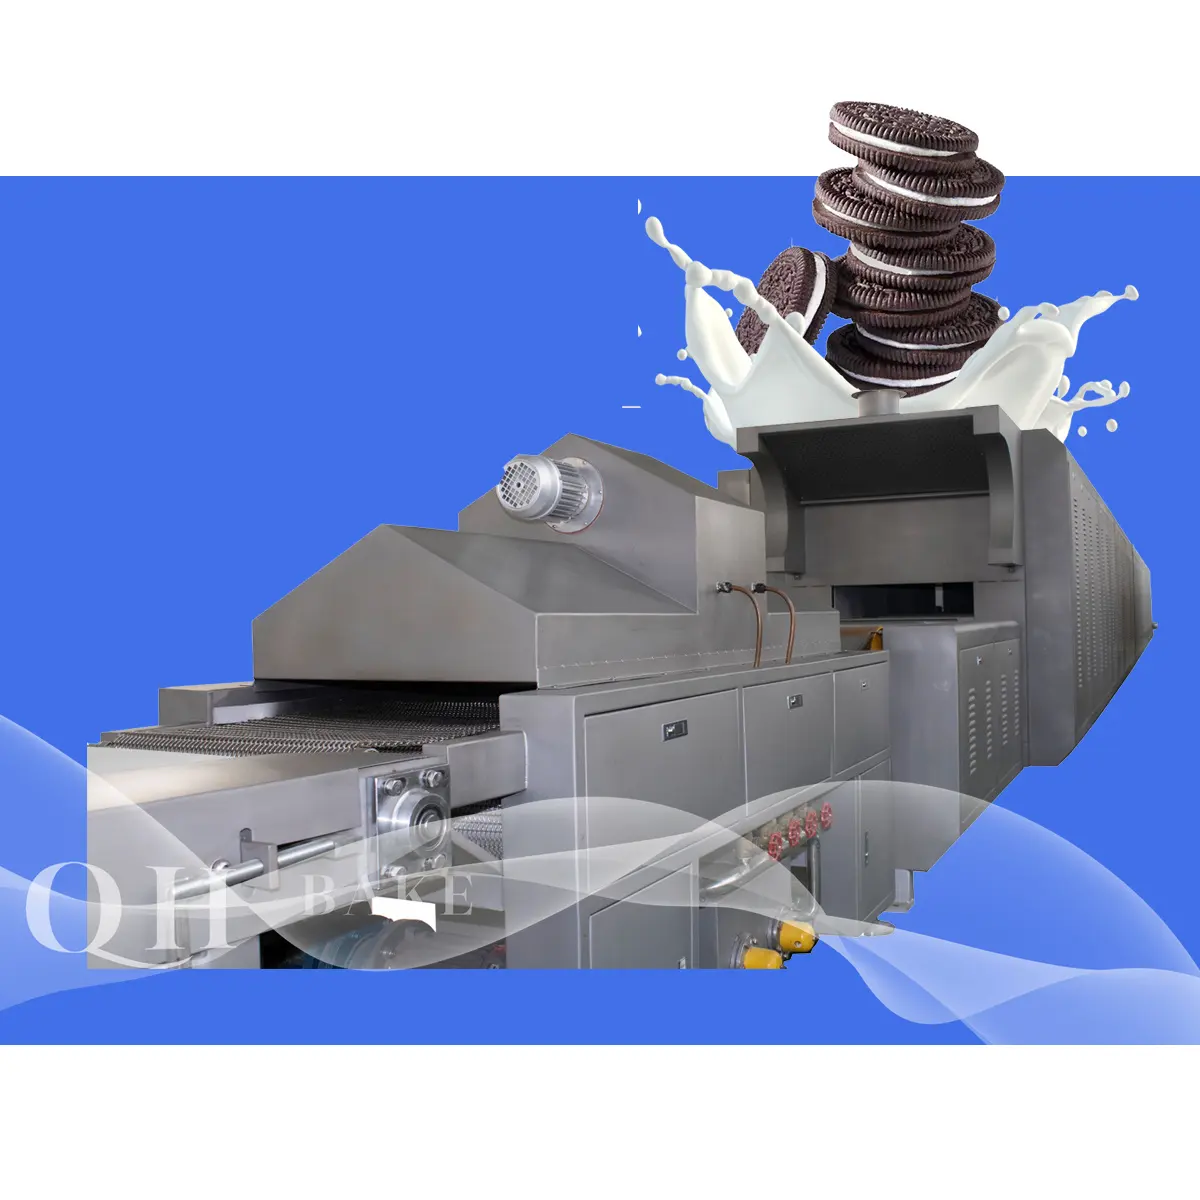 automatic biscuit making machine price in pakistan machine biscuits recipe wafer biscuit making machine rotary moulder factory